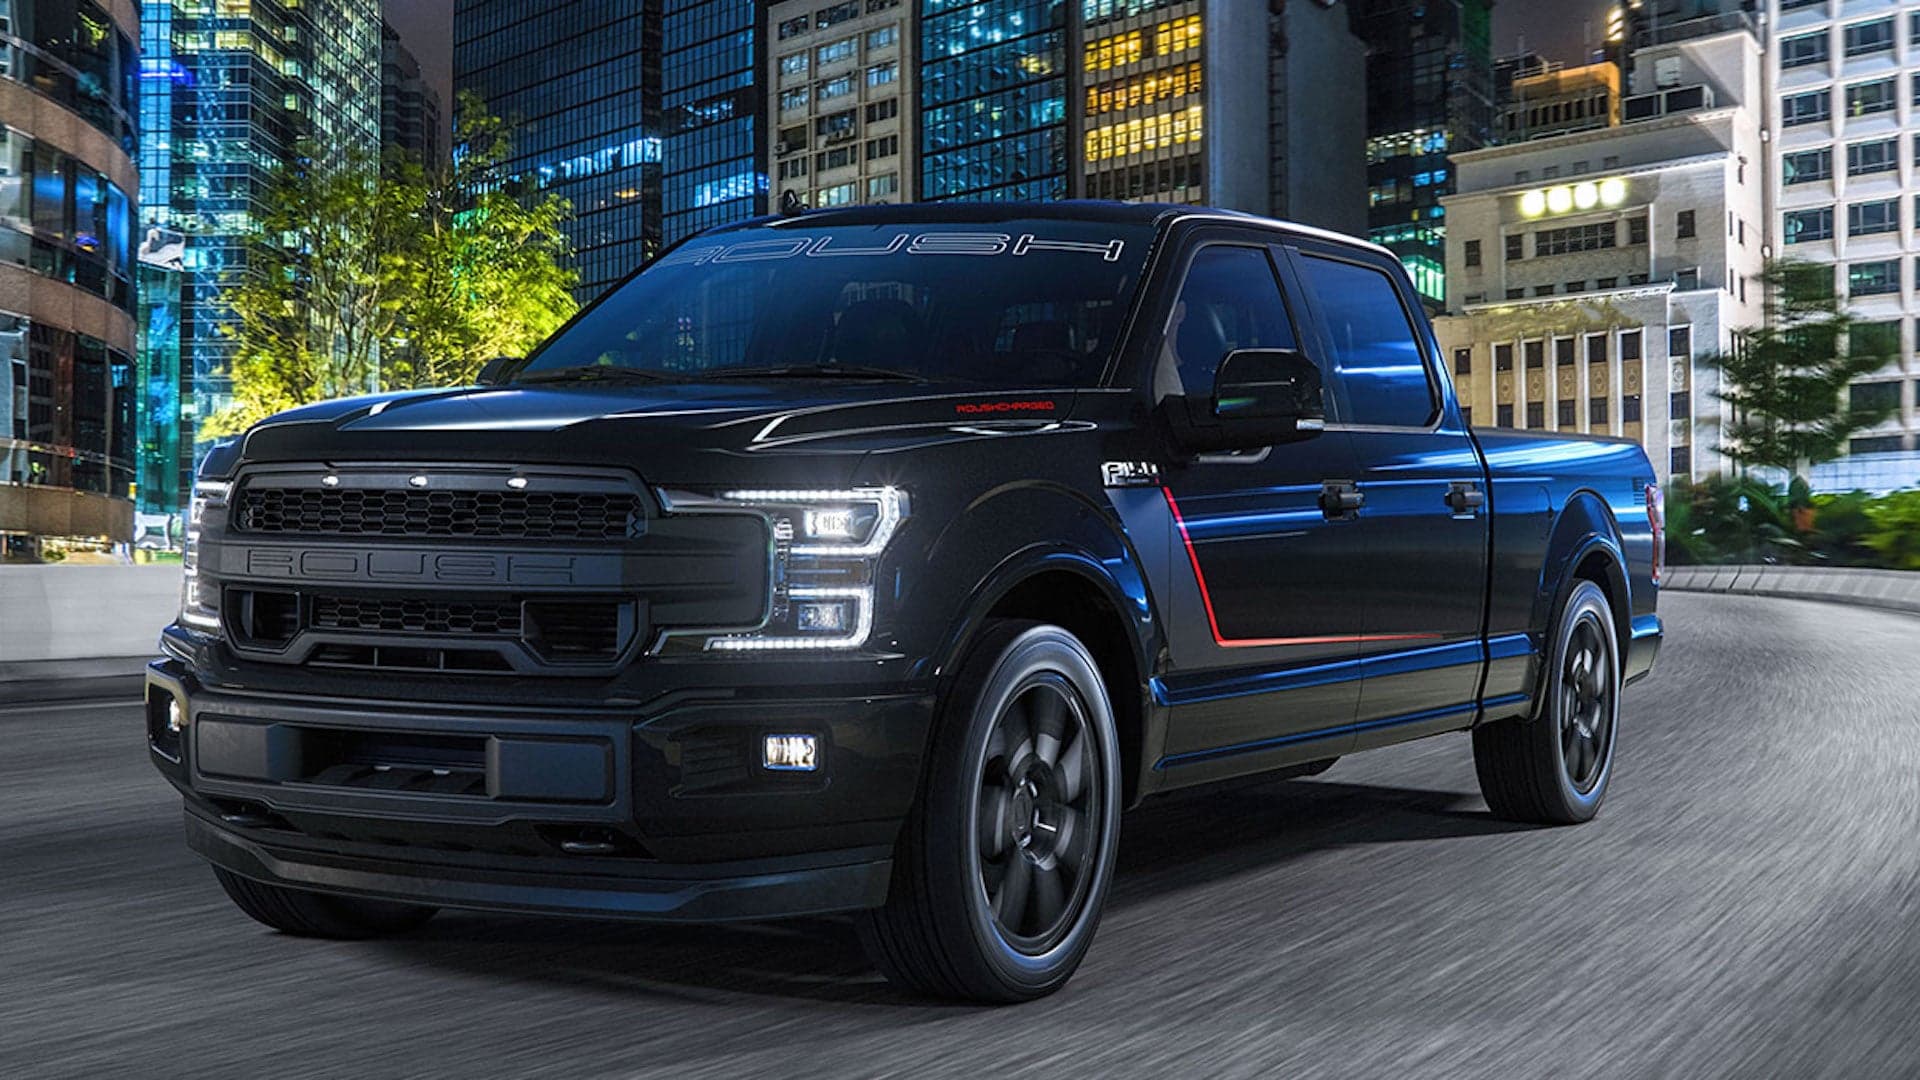 Roush Unleashes Supercharged Ford F-150 Nitemare Edition Pickup With 650 HP